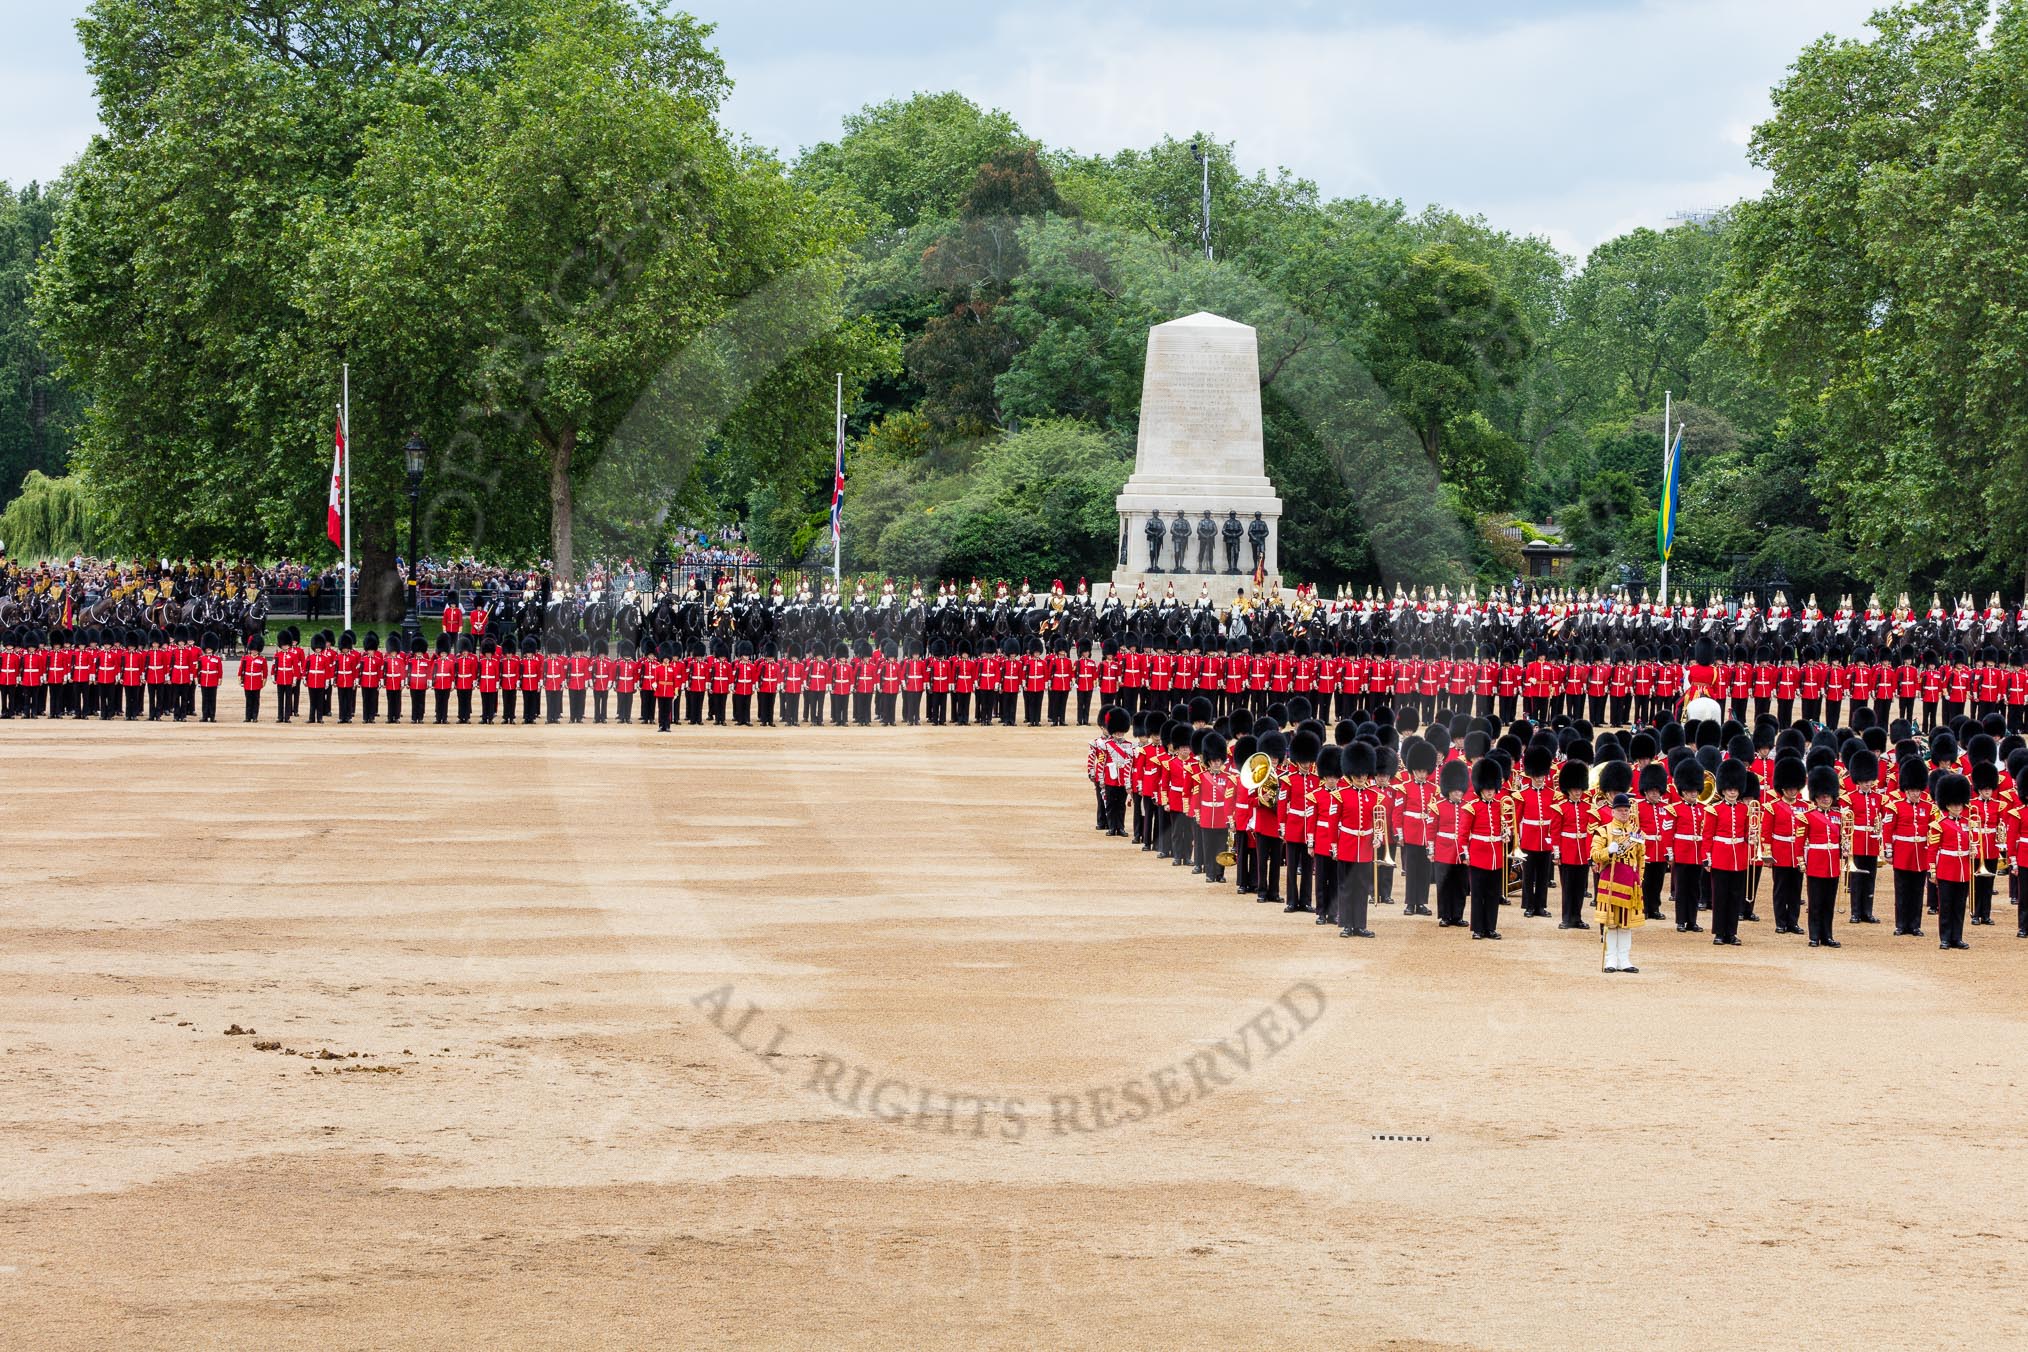 Trooping the Colour 2016.
Horse Guards Parade, Westminster,
London SW1A,
London,
United Kingdom,
on 11 June 2016 at 11:52, image #721